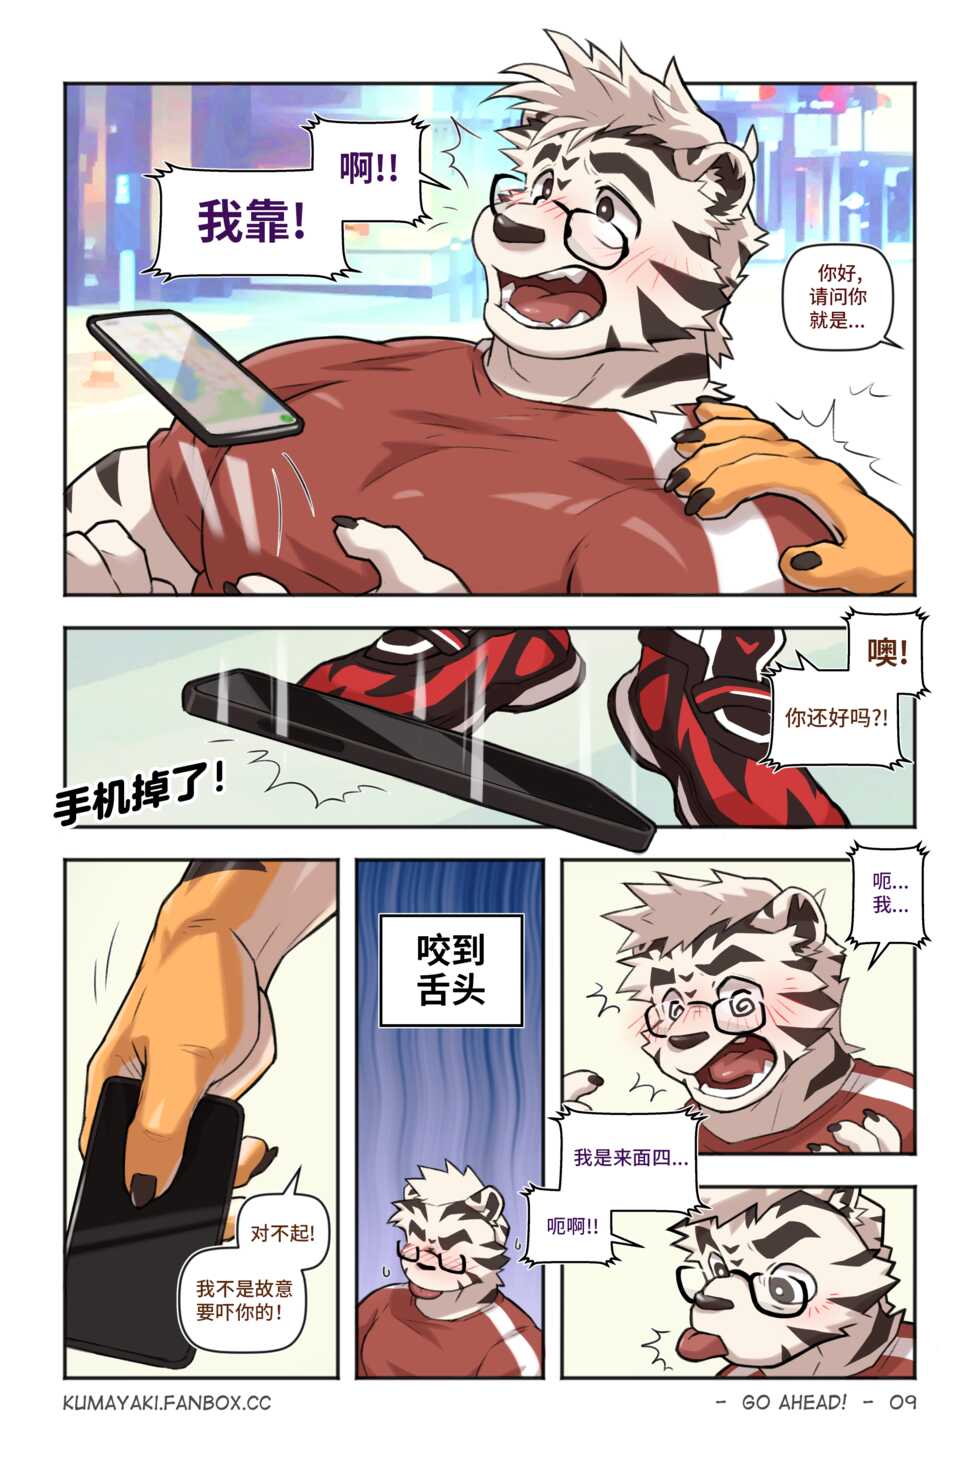 [KUMAK] Lucky Boys - Go Ahead! - (狗大汉化) [Simplified Chinese] [Ongoing] - Page 14